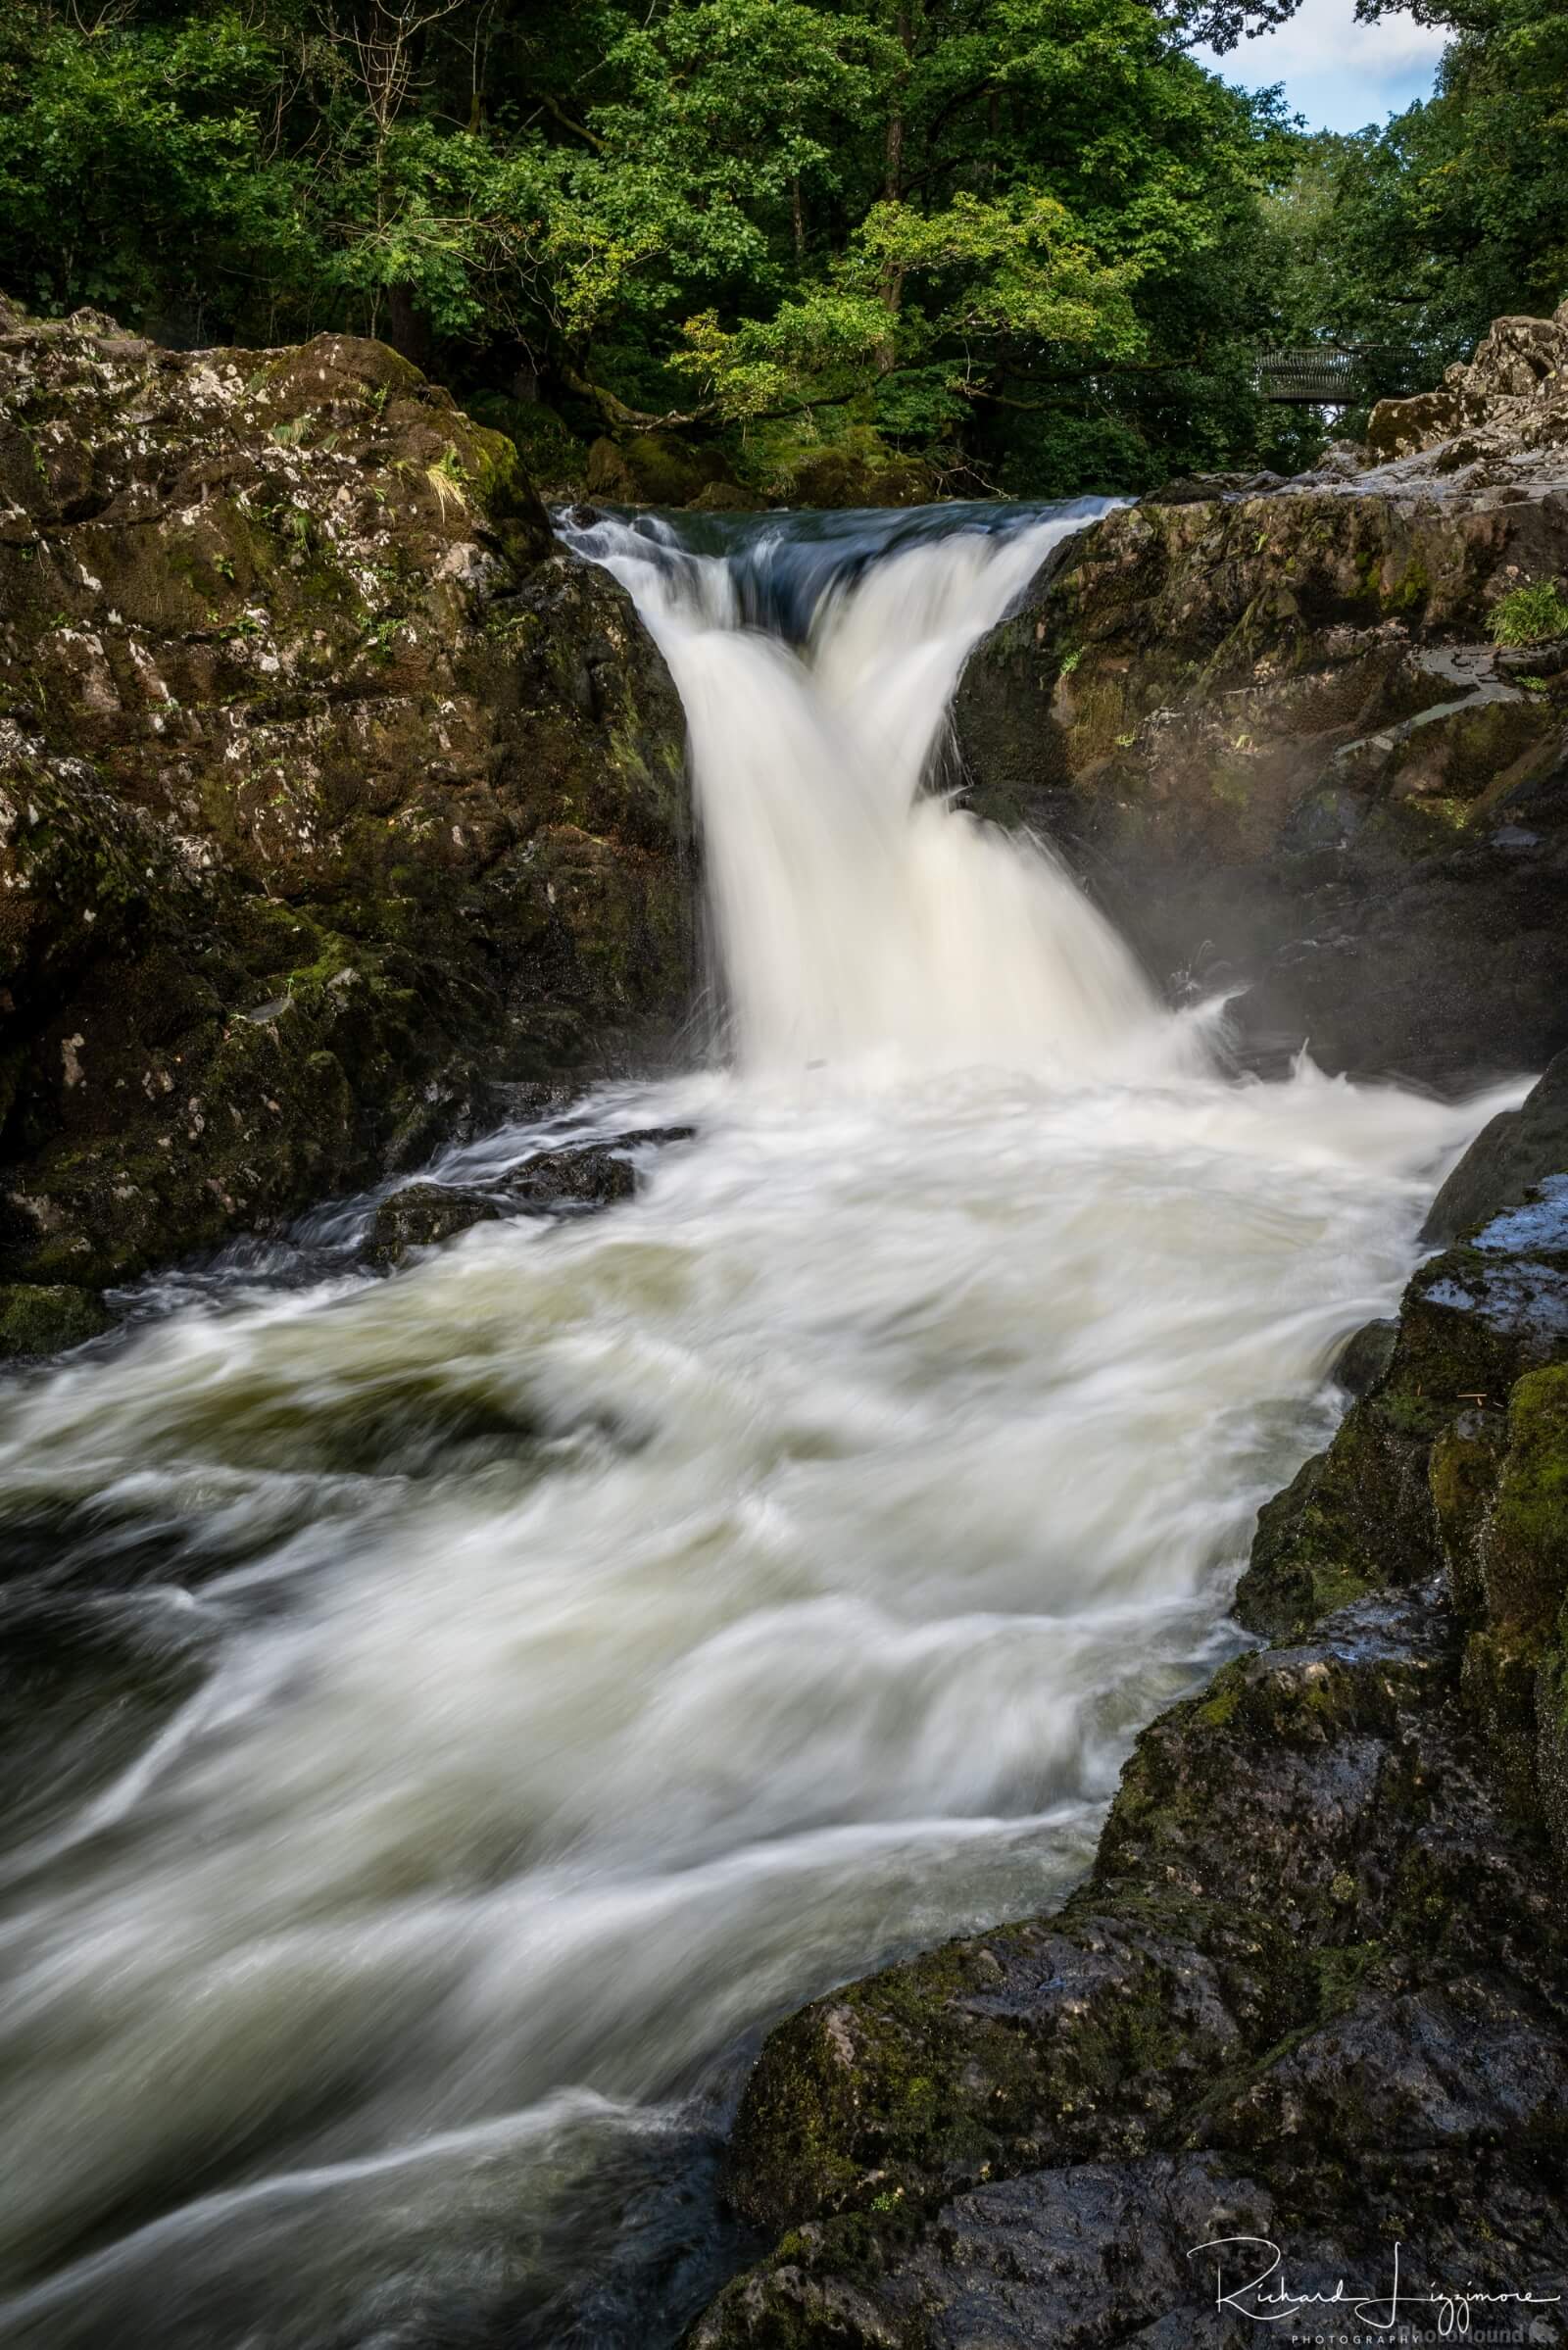 Image of Skelwith Force and Woodburn Bridge by Richard Lizzimore